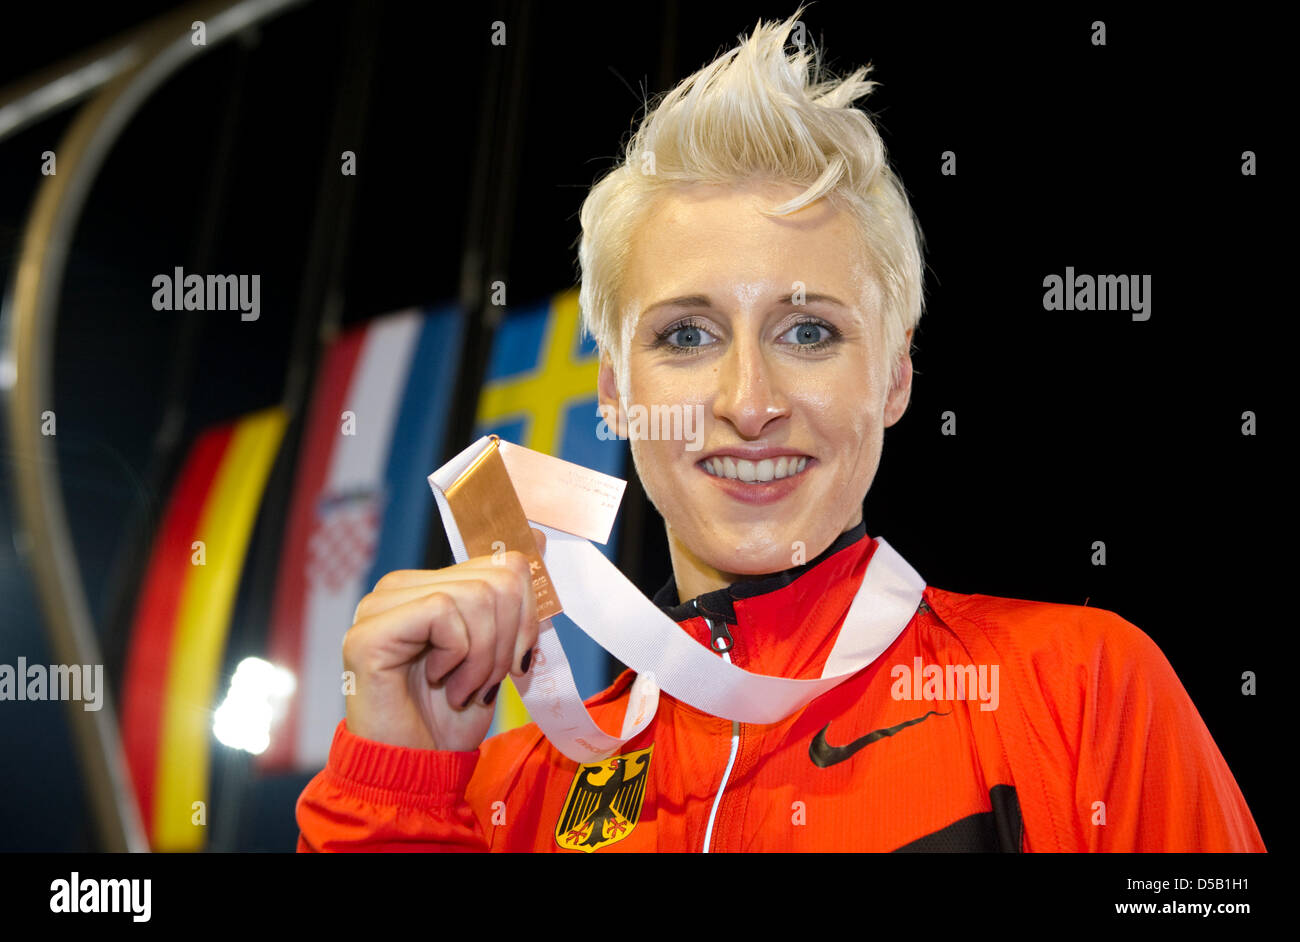 German high jumper Ariane Friedrich proudly shows her bronze medal in the women's high jump competition at the European Athletics Championships in Barcelona, Spain, 01 August 2010. Photo: Bernd Thissen Stock Photo